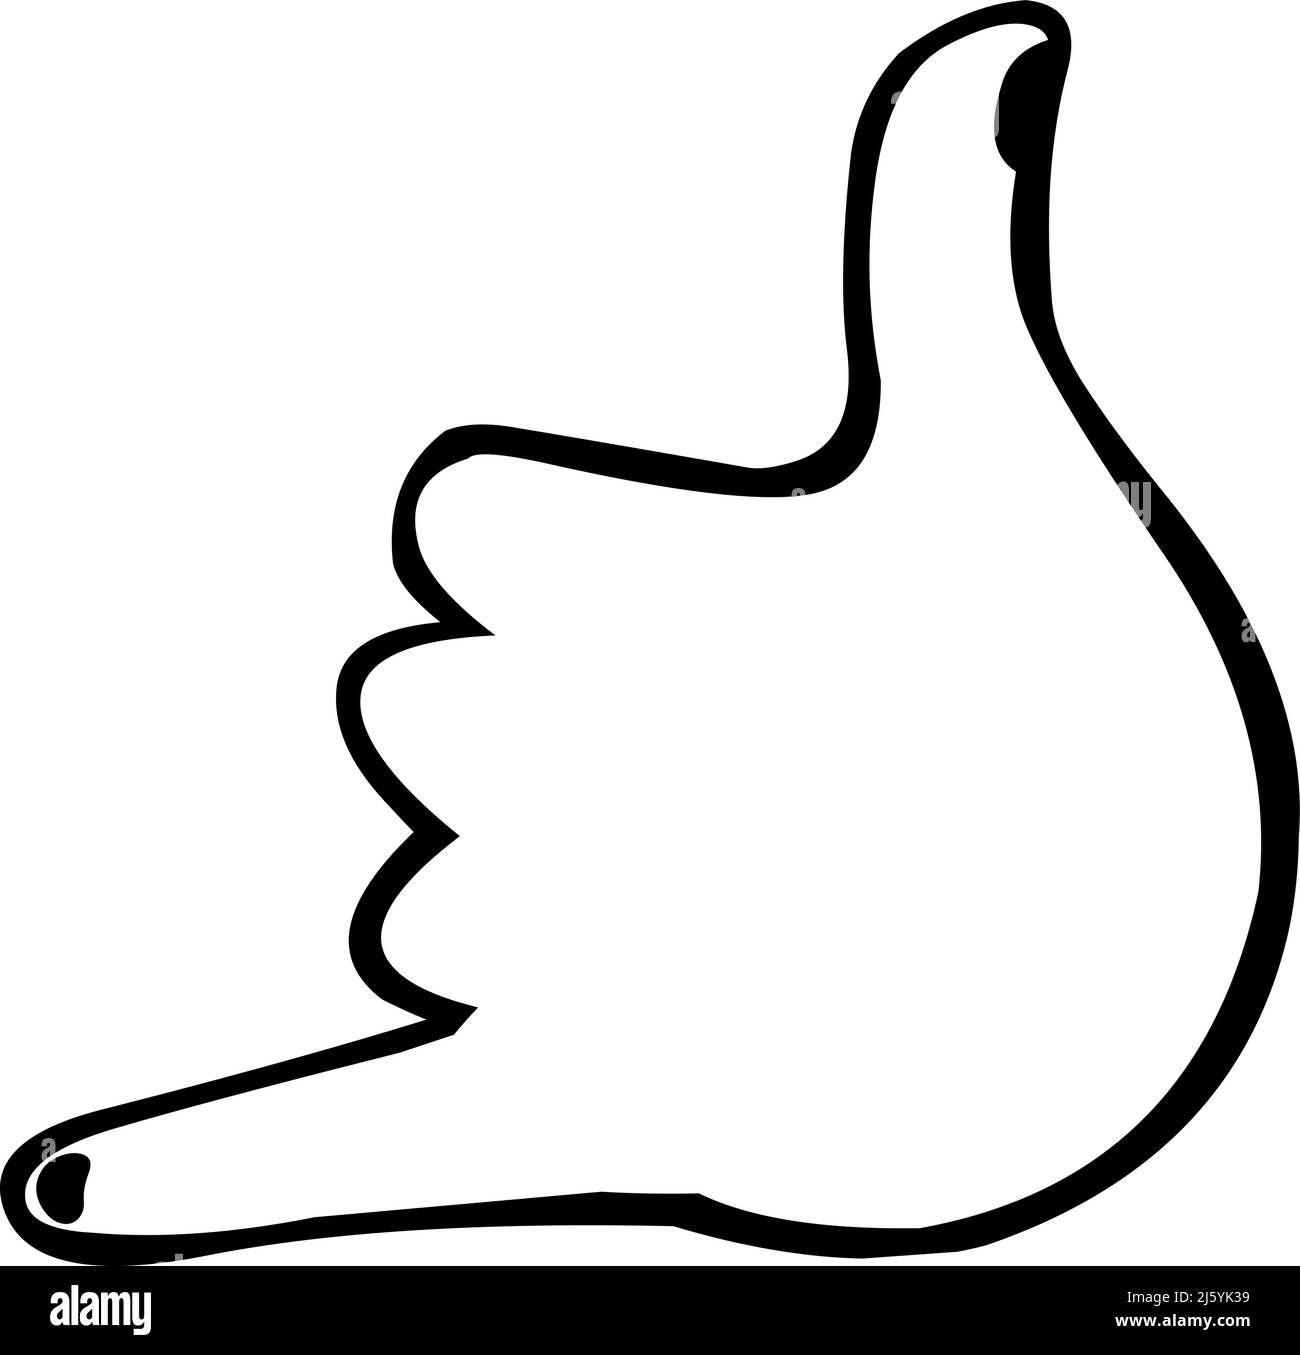 Vector illustration of a hand doing the classic shake gesture, drawn in black and white Stock Vector